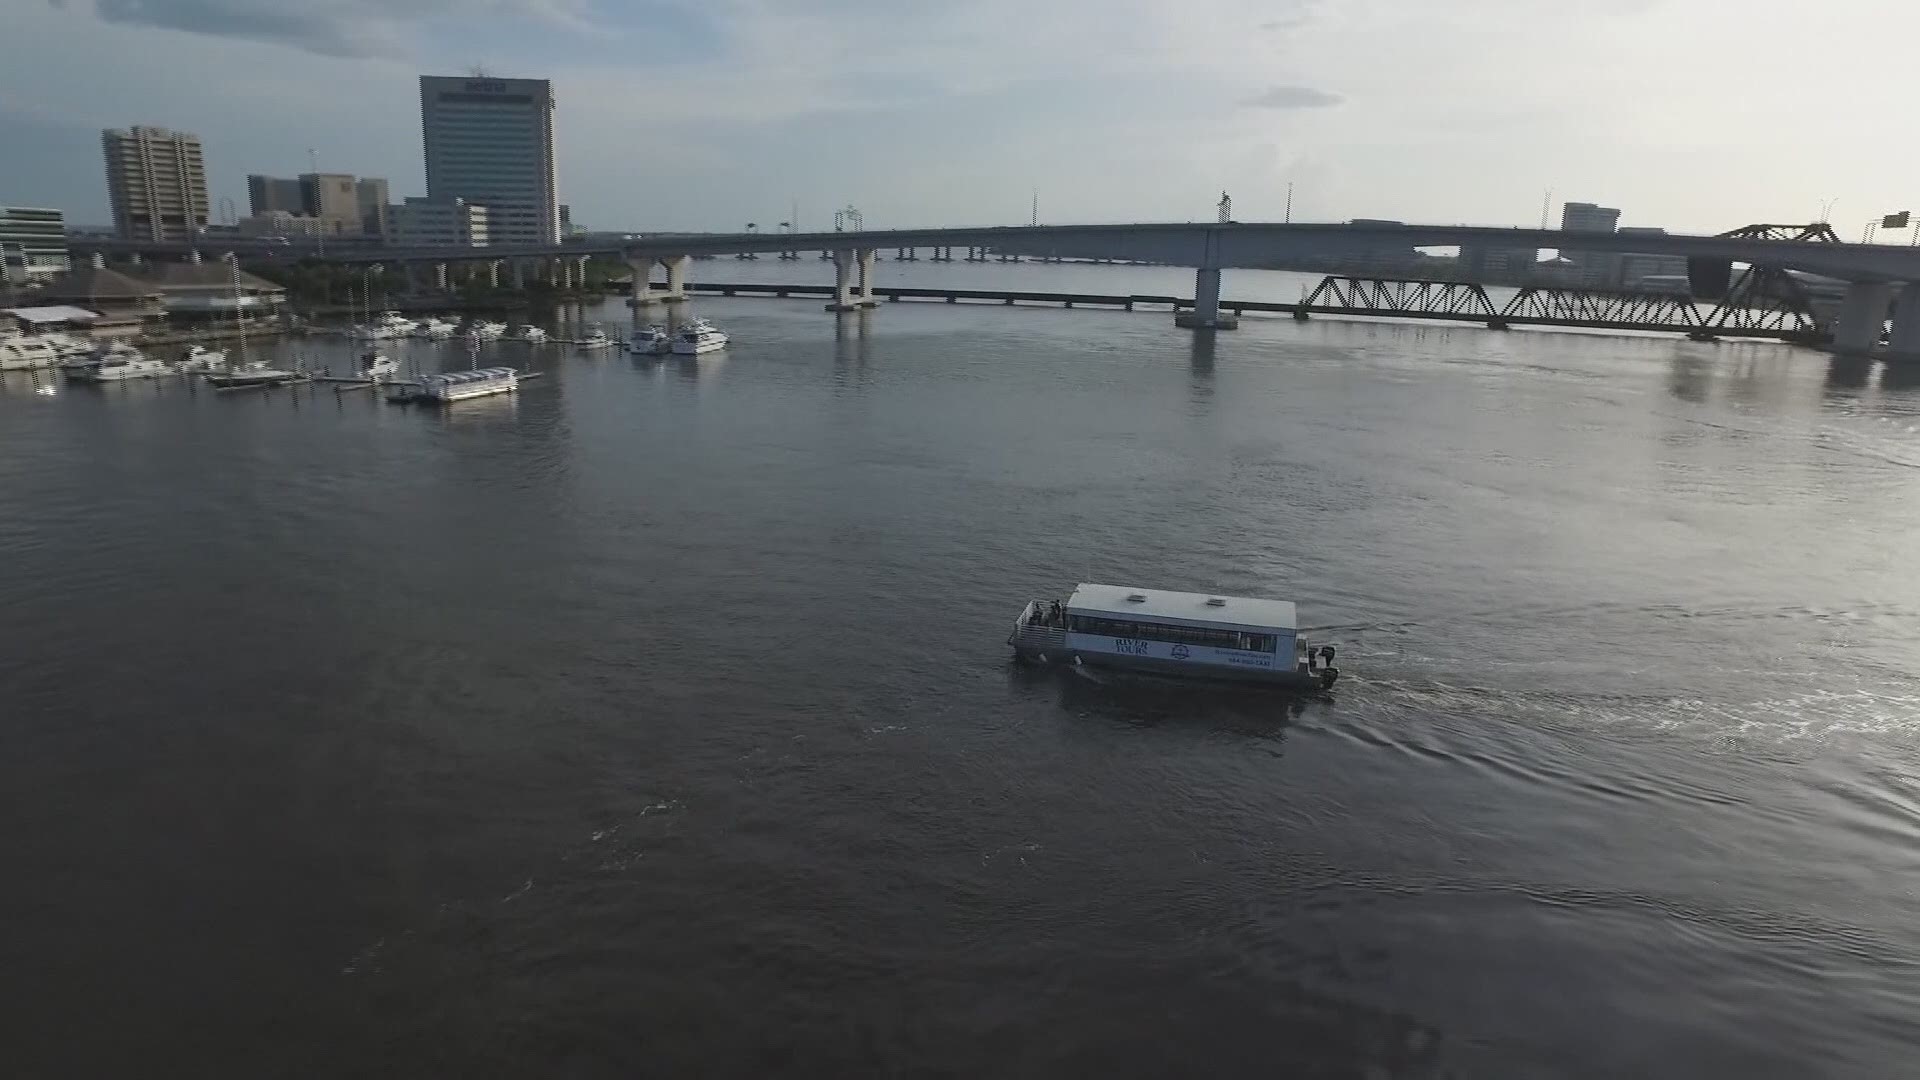 It was 100 years ago that downtown Jacksonville’s first bridge opened, the Acosta Bridge